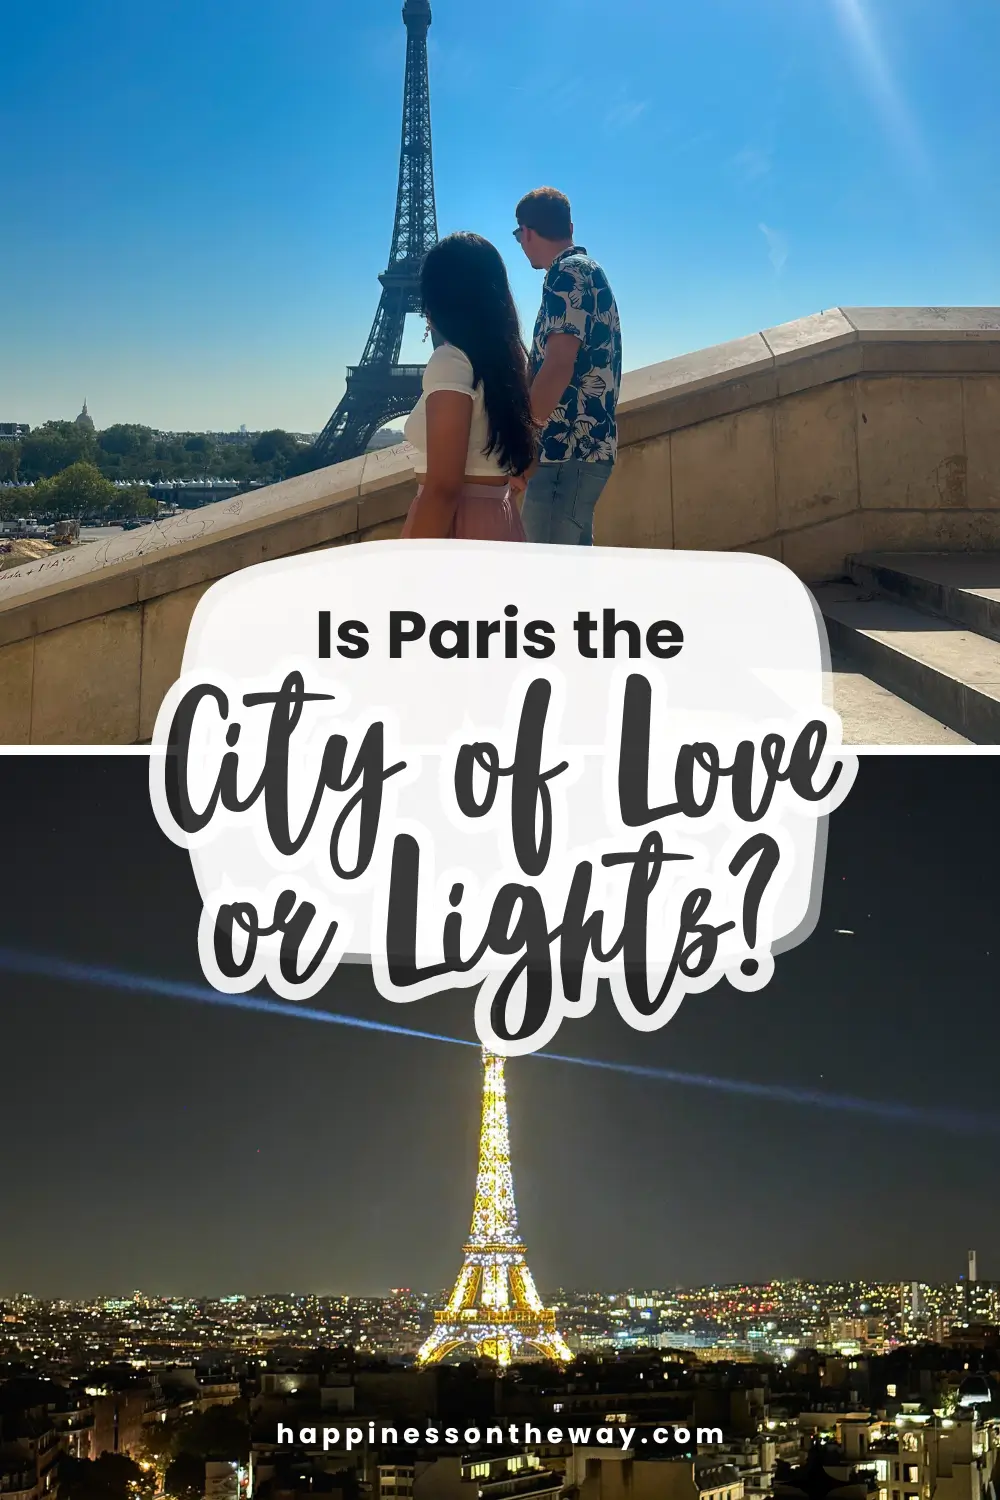 Top photo of us during the day walking on stairs at Trocadero looking at the Eiffel Tower. Bottom Photo: Eiffel Tower illuminated at night with a text "Is Paris the City of Love or Lights?"